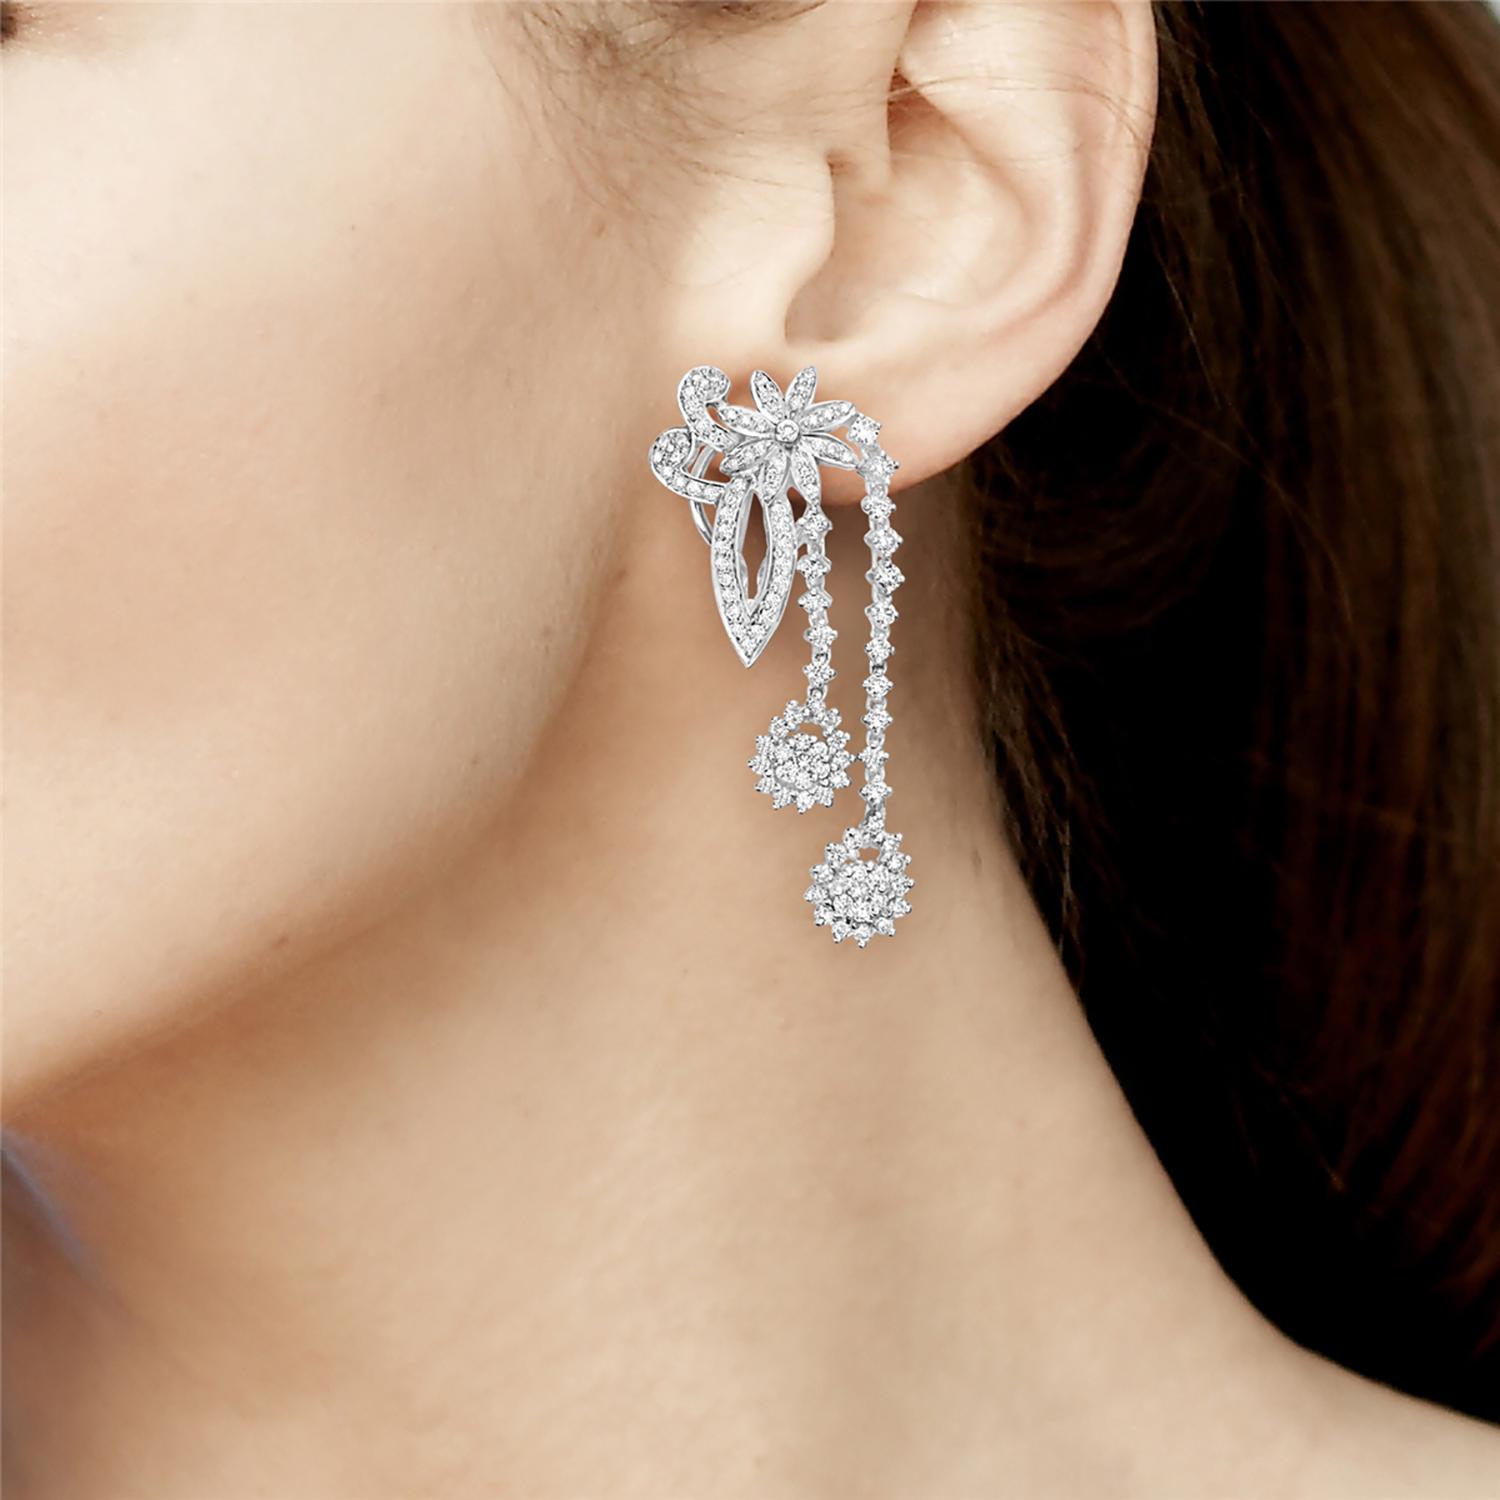 Elevate your jewelry collection with these exquisite Floral Shaped Earrings With VS Diamonds Made In 18k White Gold. These earrings feature a stunning floral motif, crafted from high-quality 18k white gold that glows with a radiant